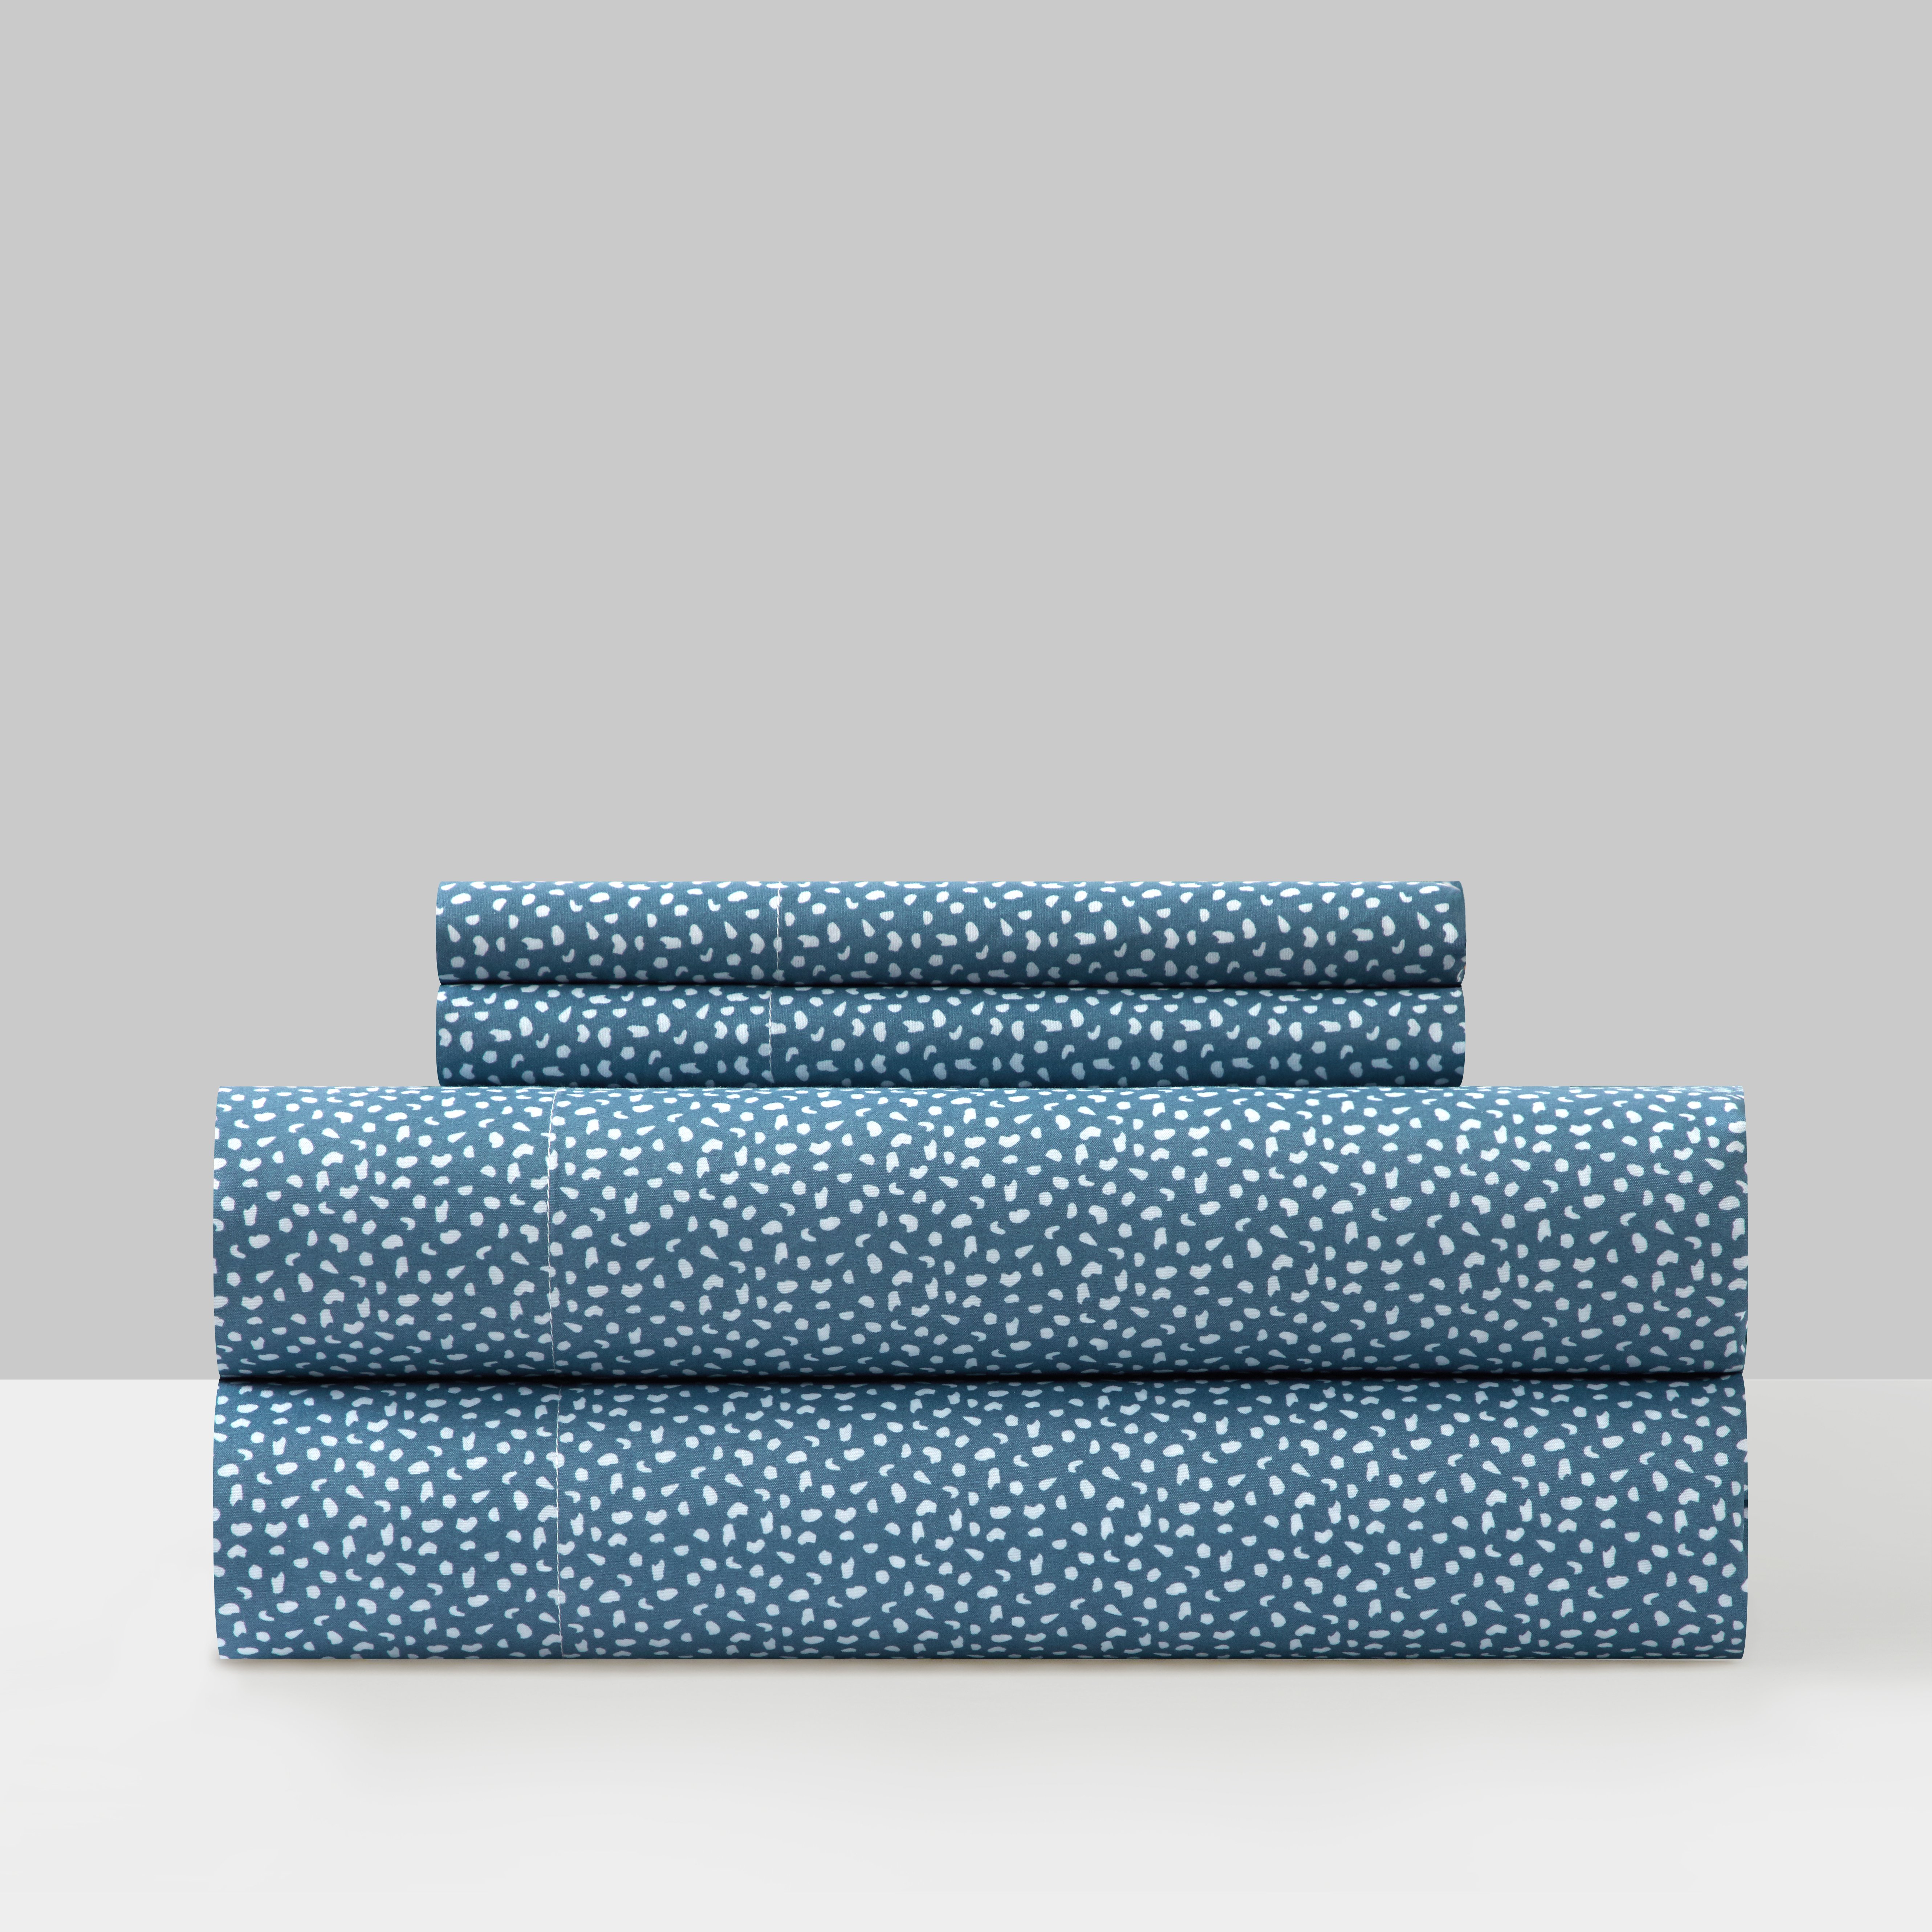 Dobe 3 Or 4 Piece Sheet Set Solid Color With White Spots Animal Pattern Print Design - Blue, Twin